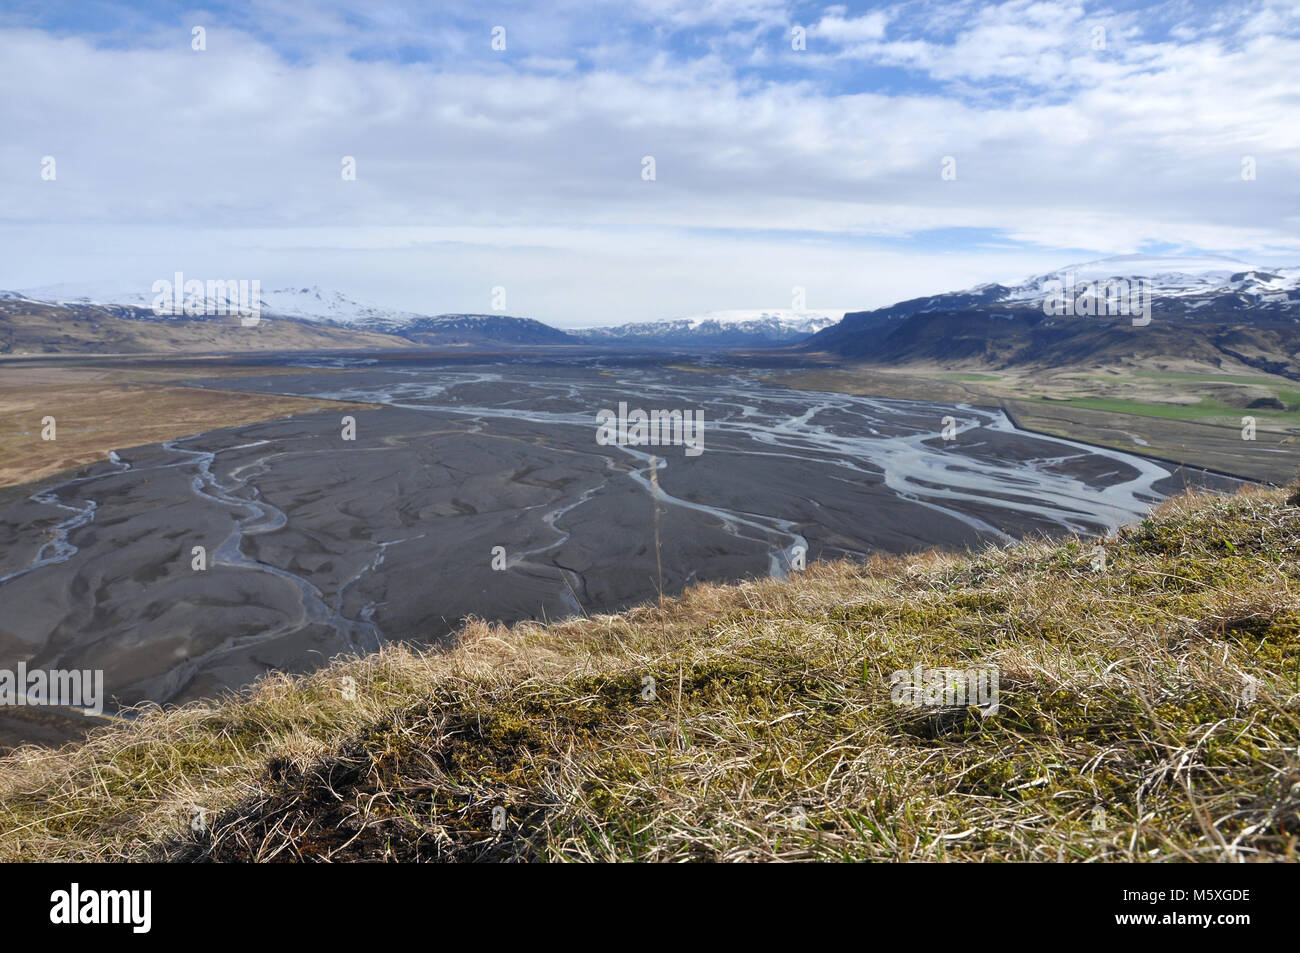 Views across Icelandic flood plain from top of a hill with mountains and glacier background. Stock Photo